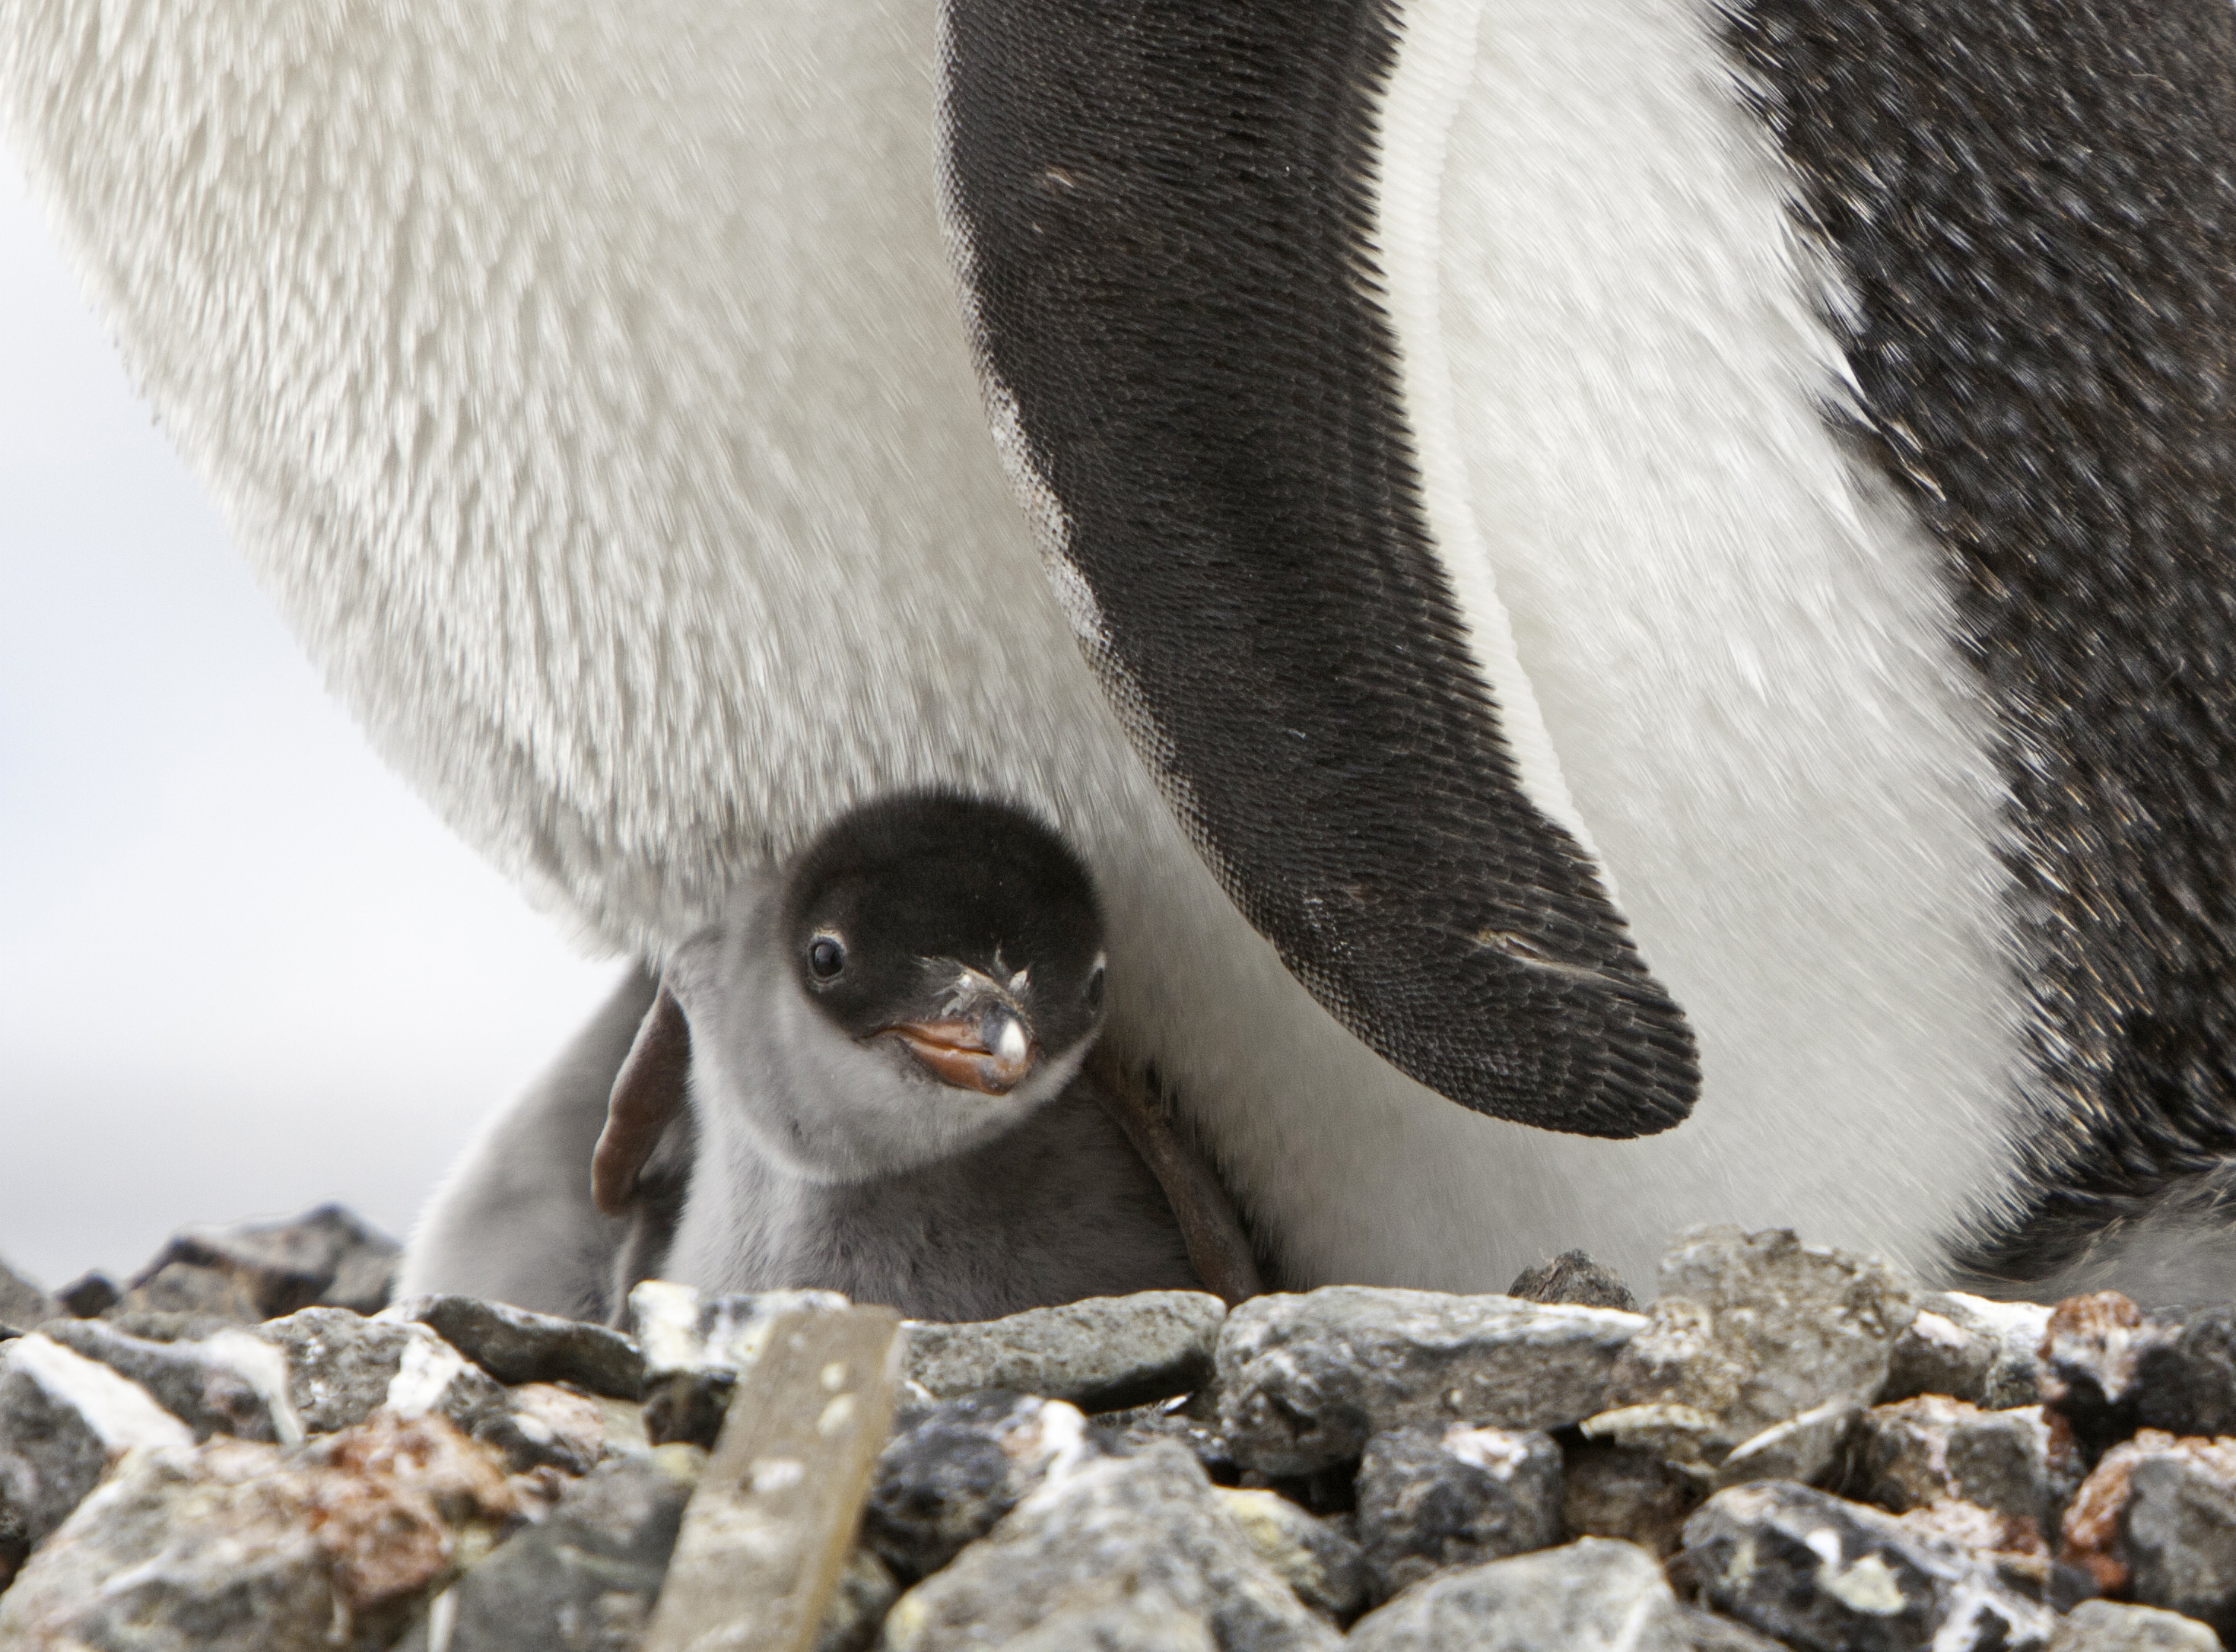 Baby penguin peers out at a frozen world. Photo by Sandra Walser.